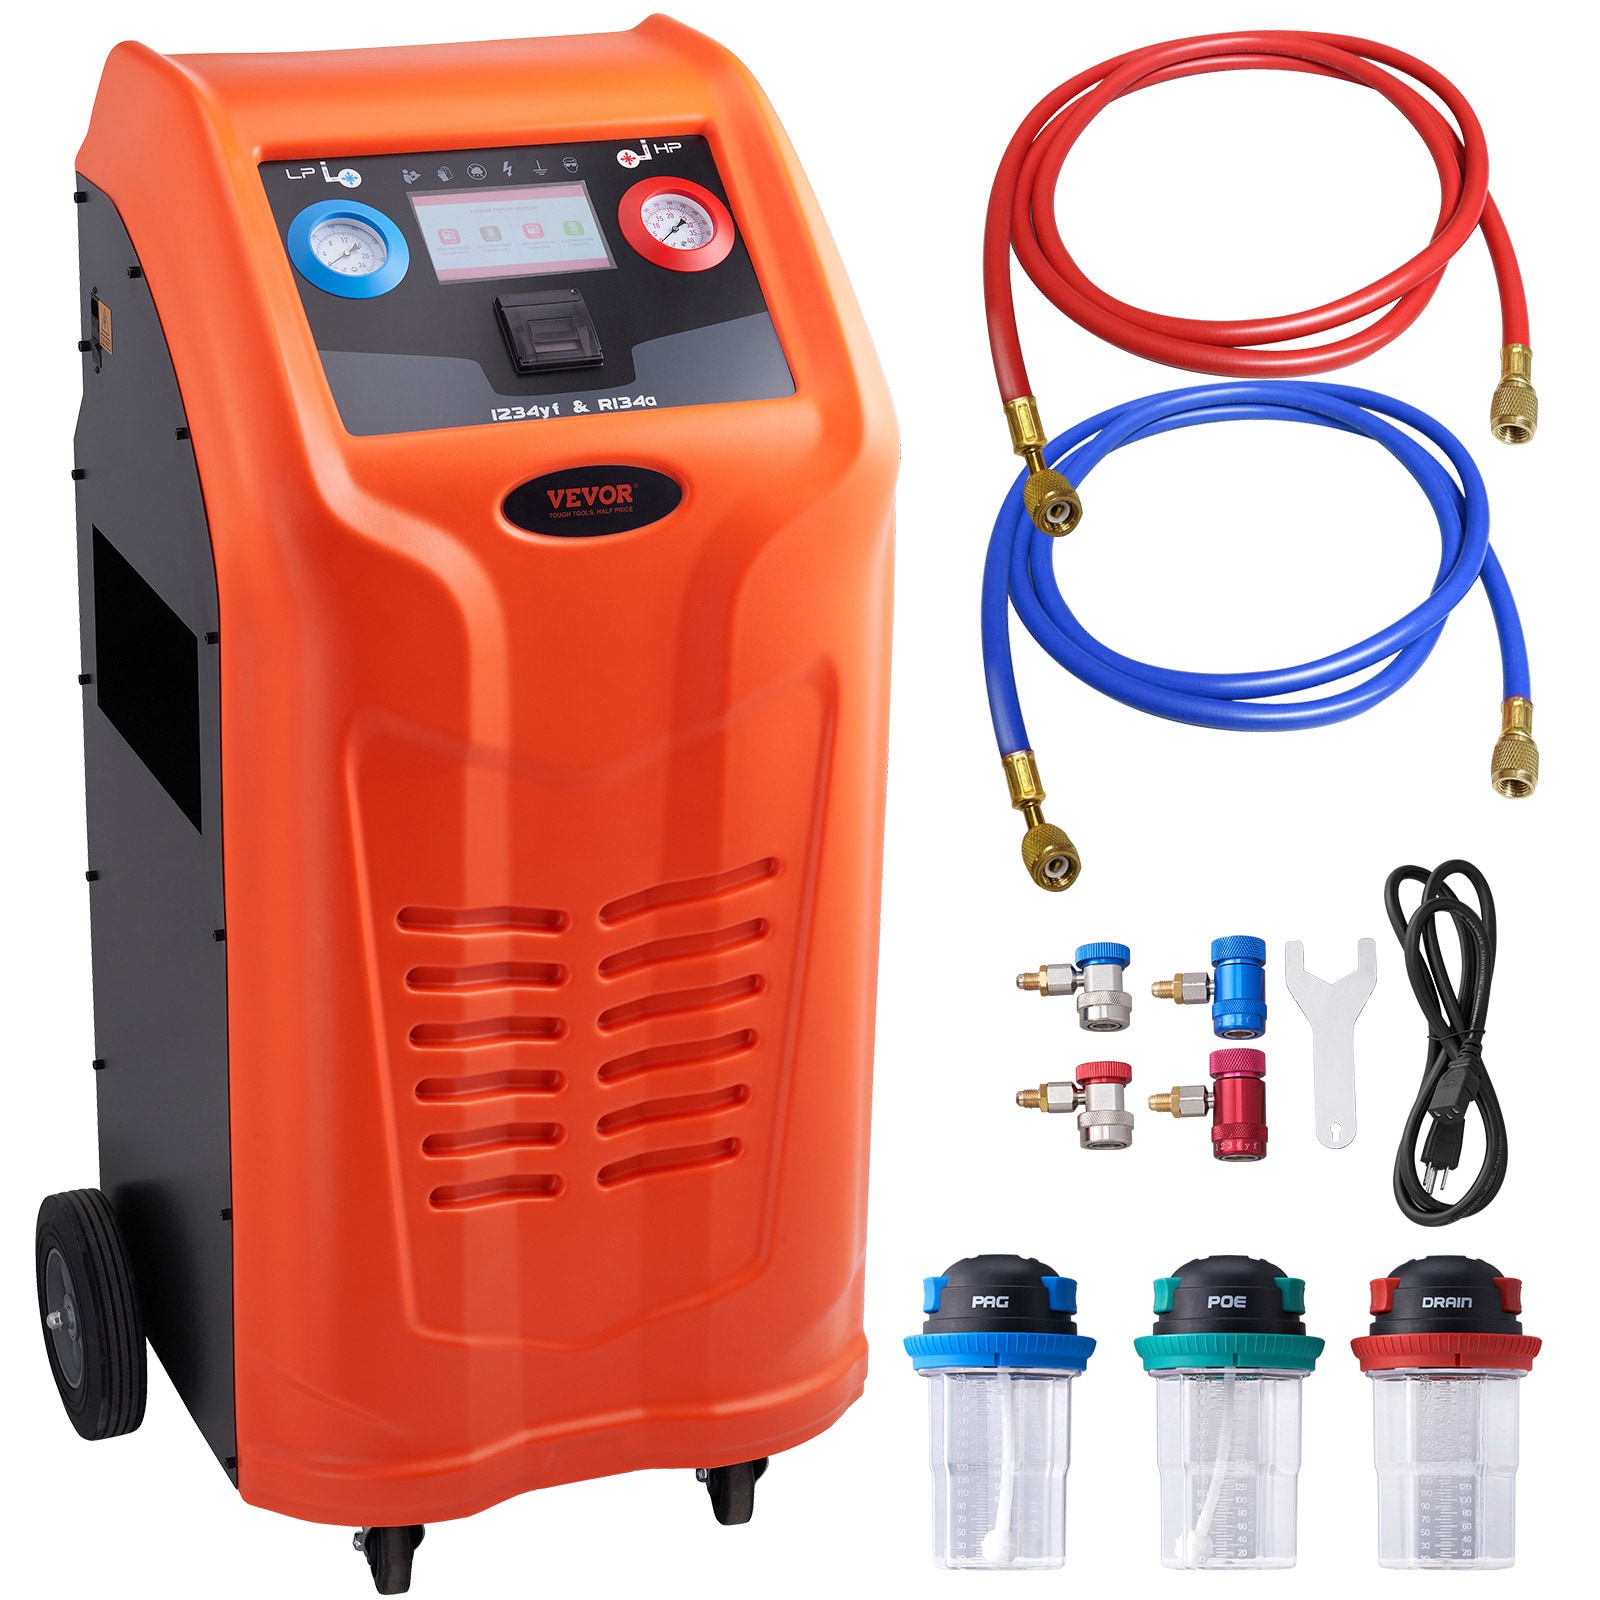 VEVOR Automatic Recovery Machine 1000W 24.4-in W x 51.3-in H